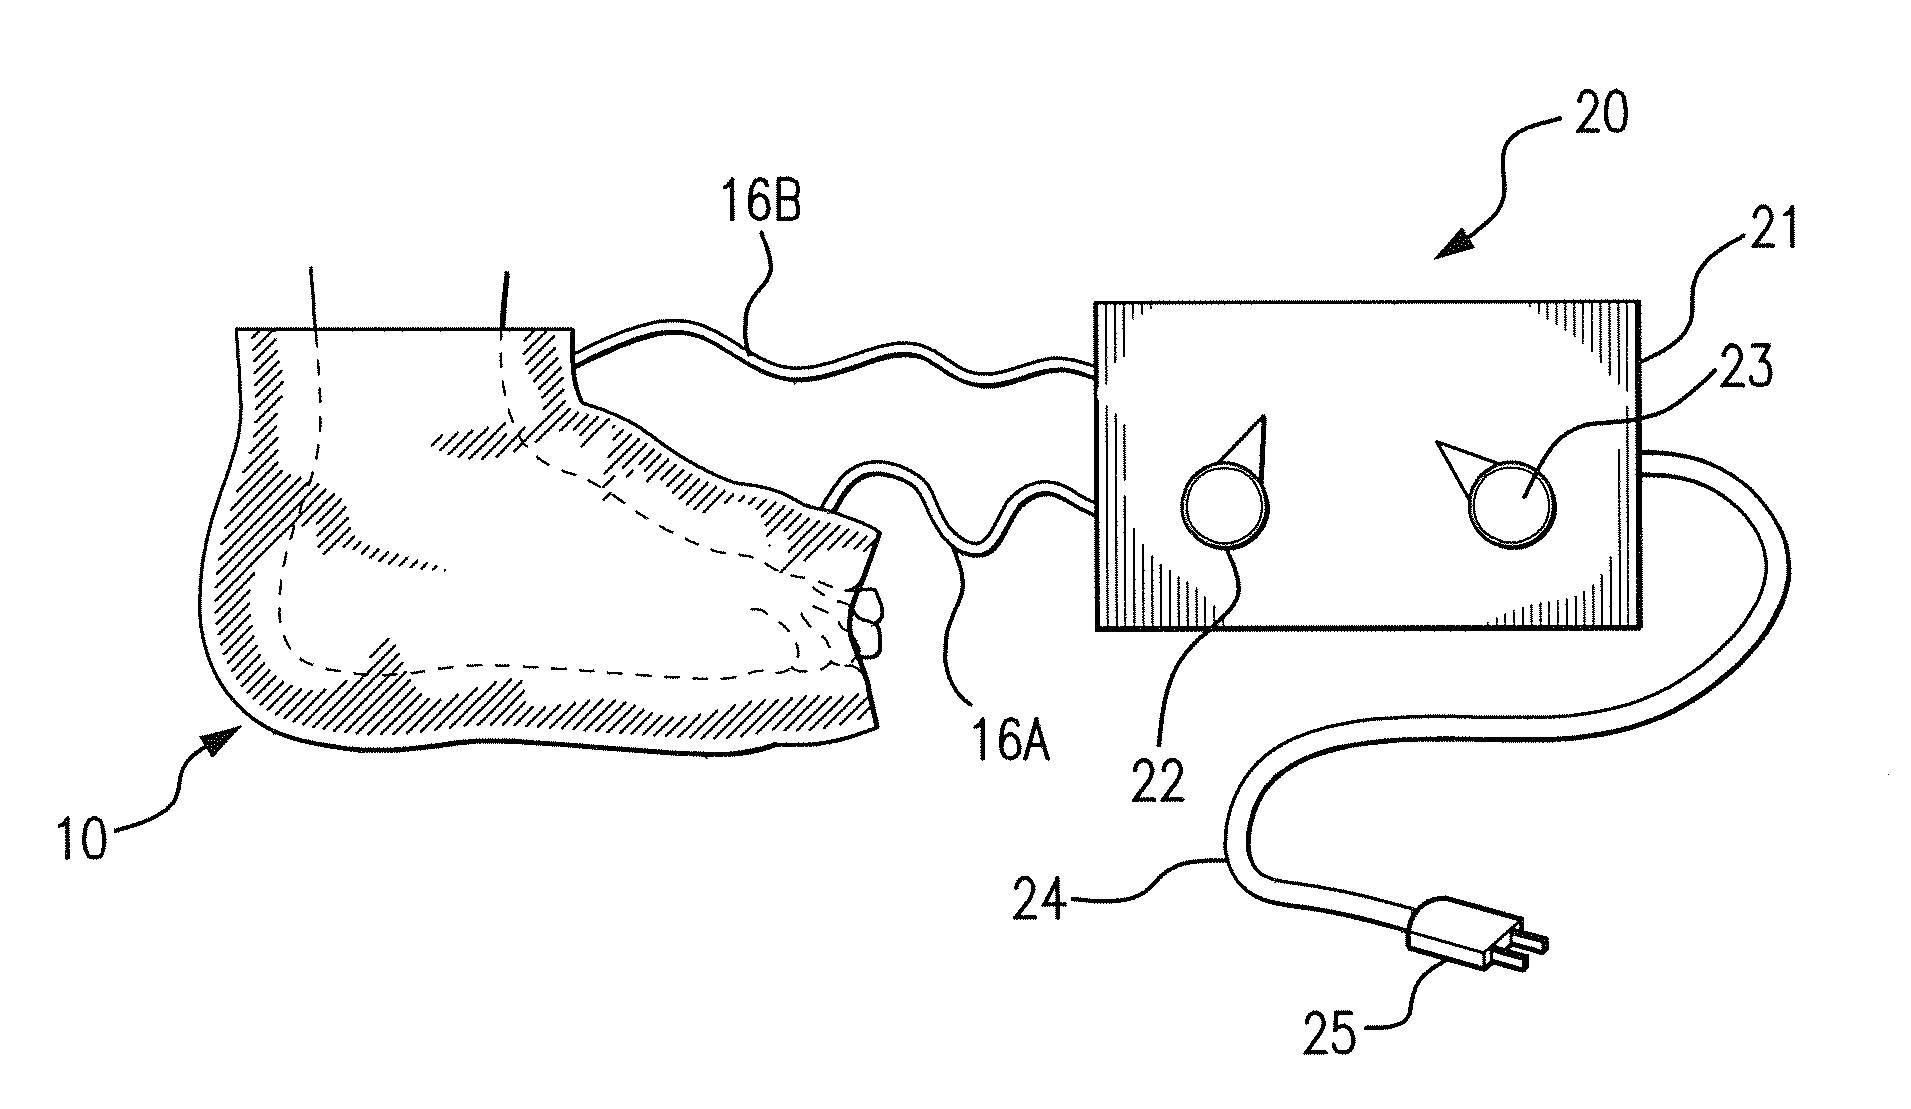 Electrical pulse generator to create magnetic pulses for the treatment of pain